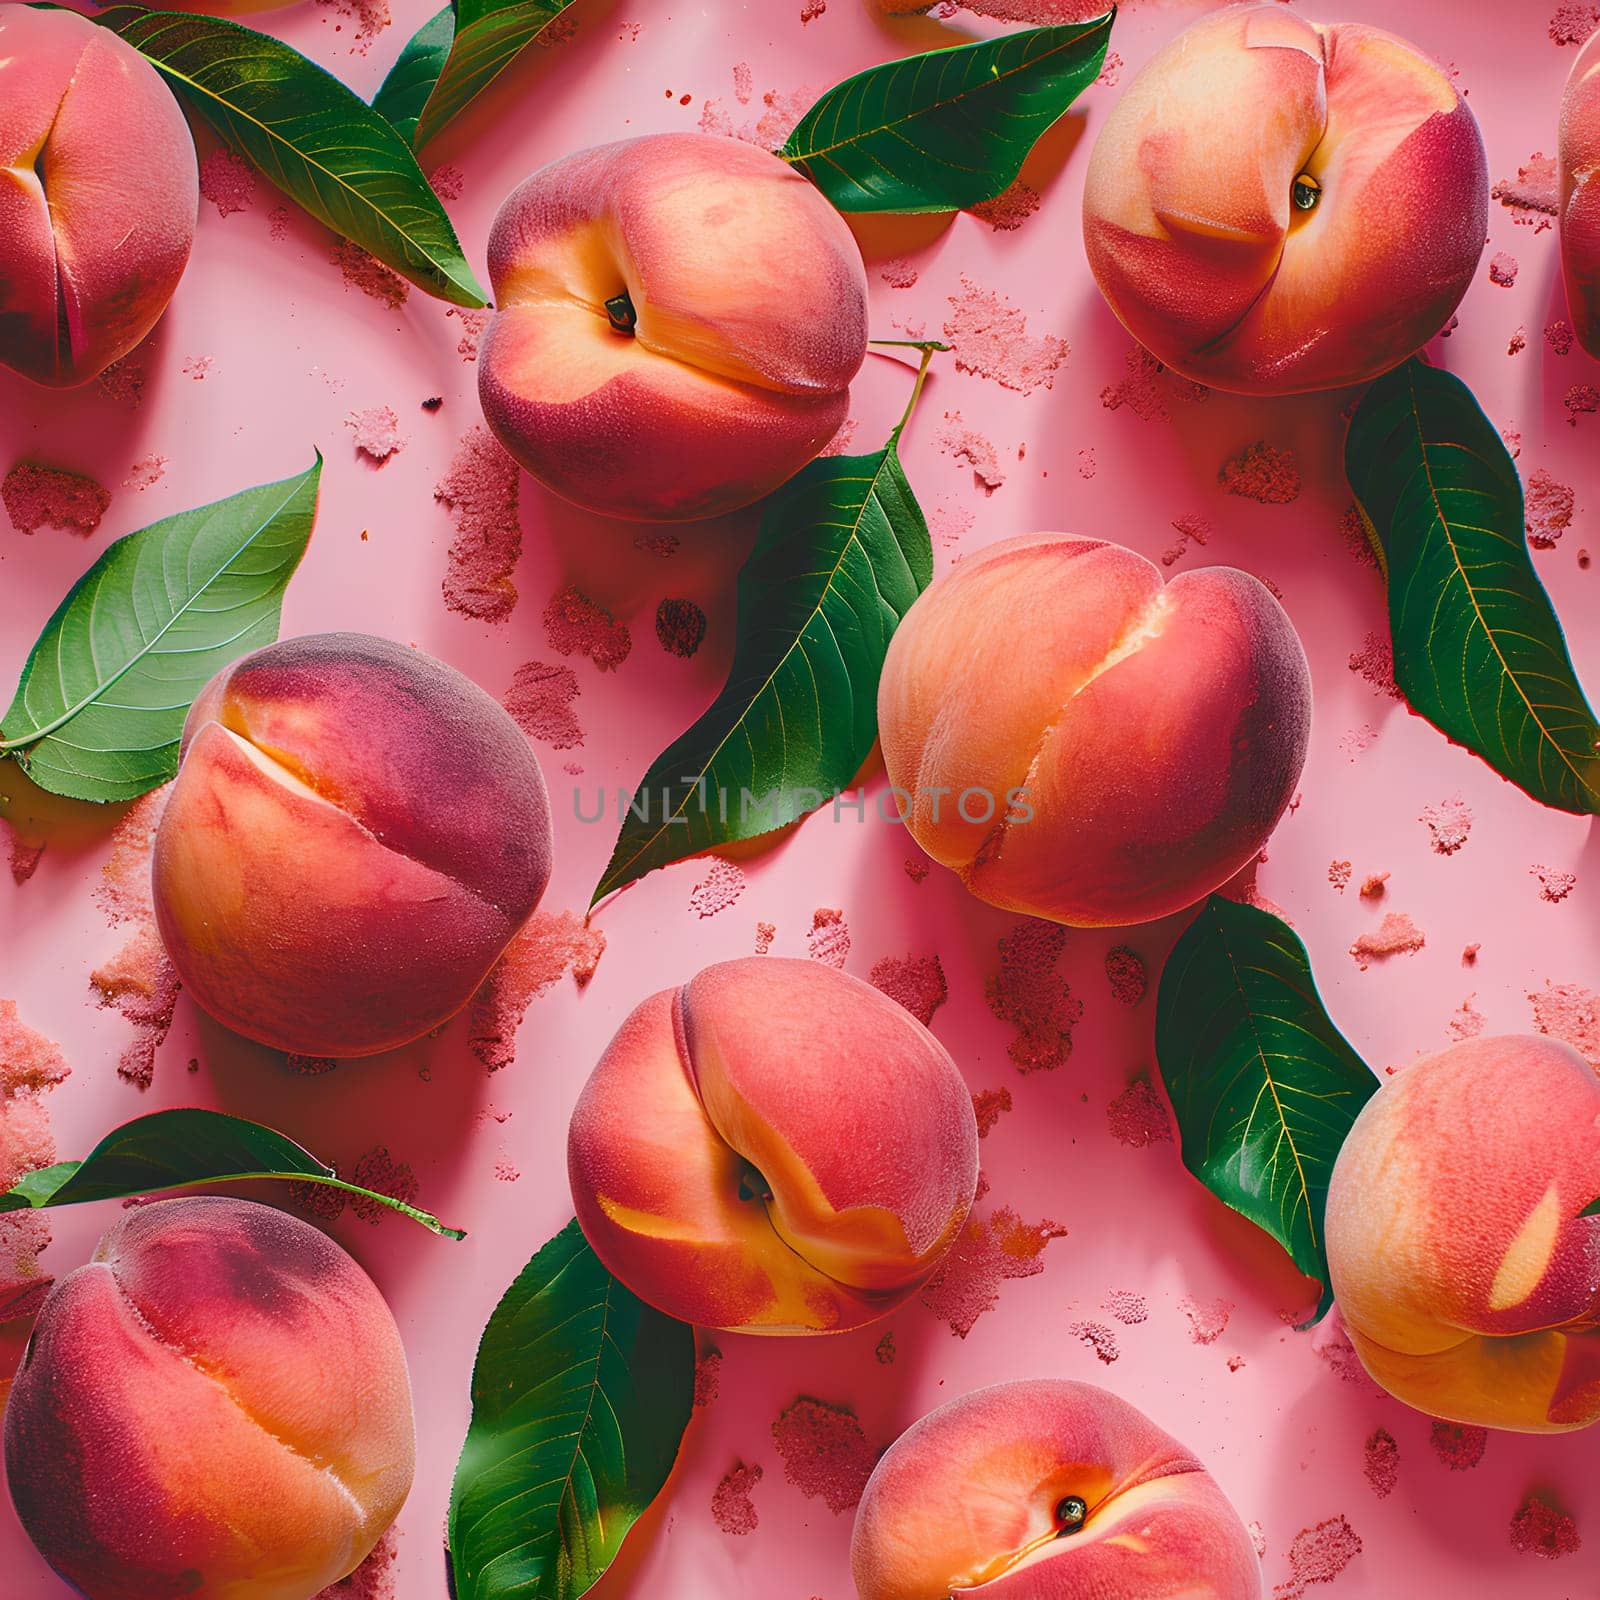 A bunch of peaches with green leaves on a pink surface, perfect for a delicious recipe. These natural foods are a great source of vitamins and minerals, ideal as an ingredient for fresh produce